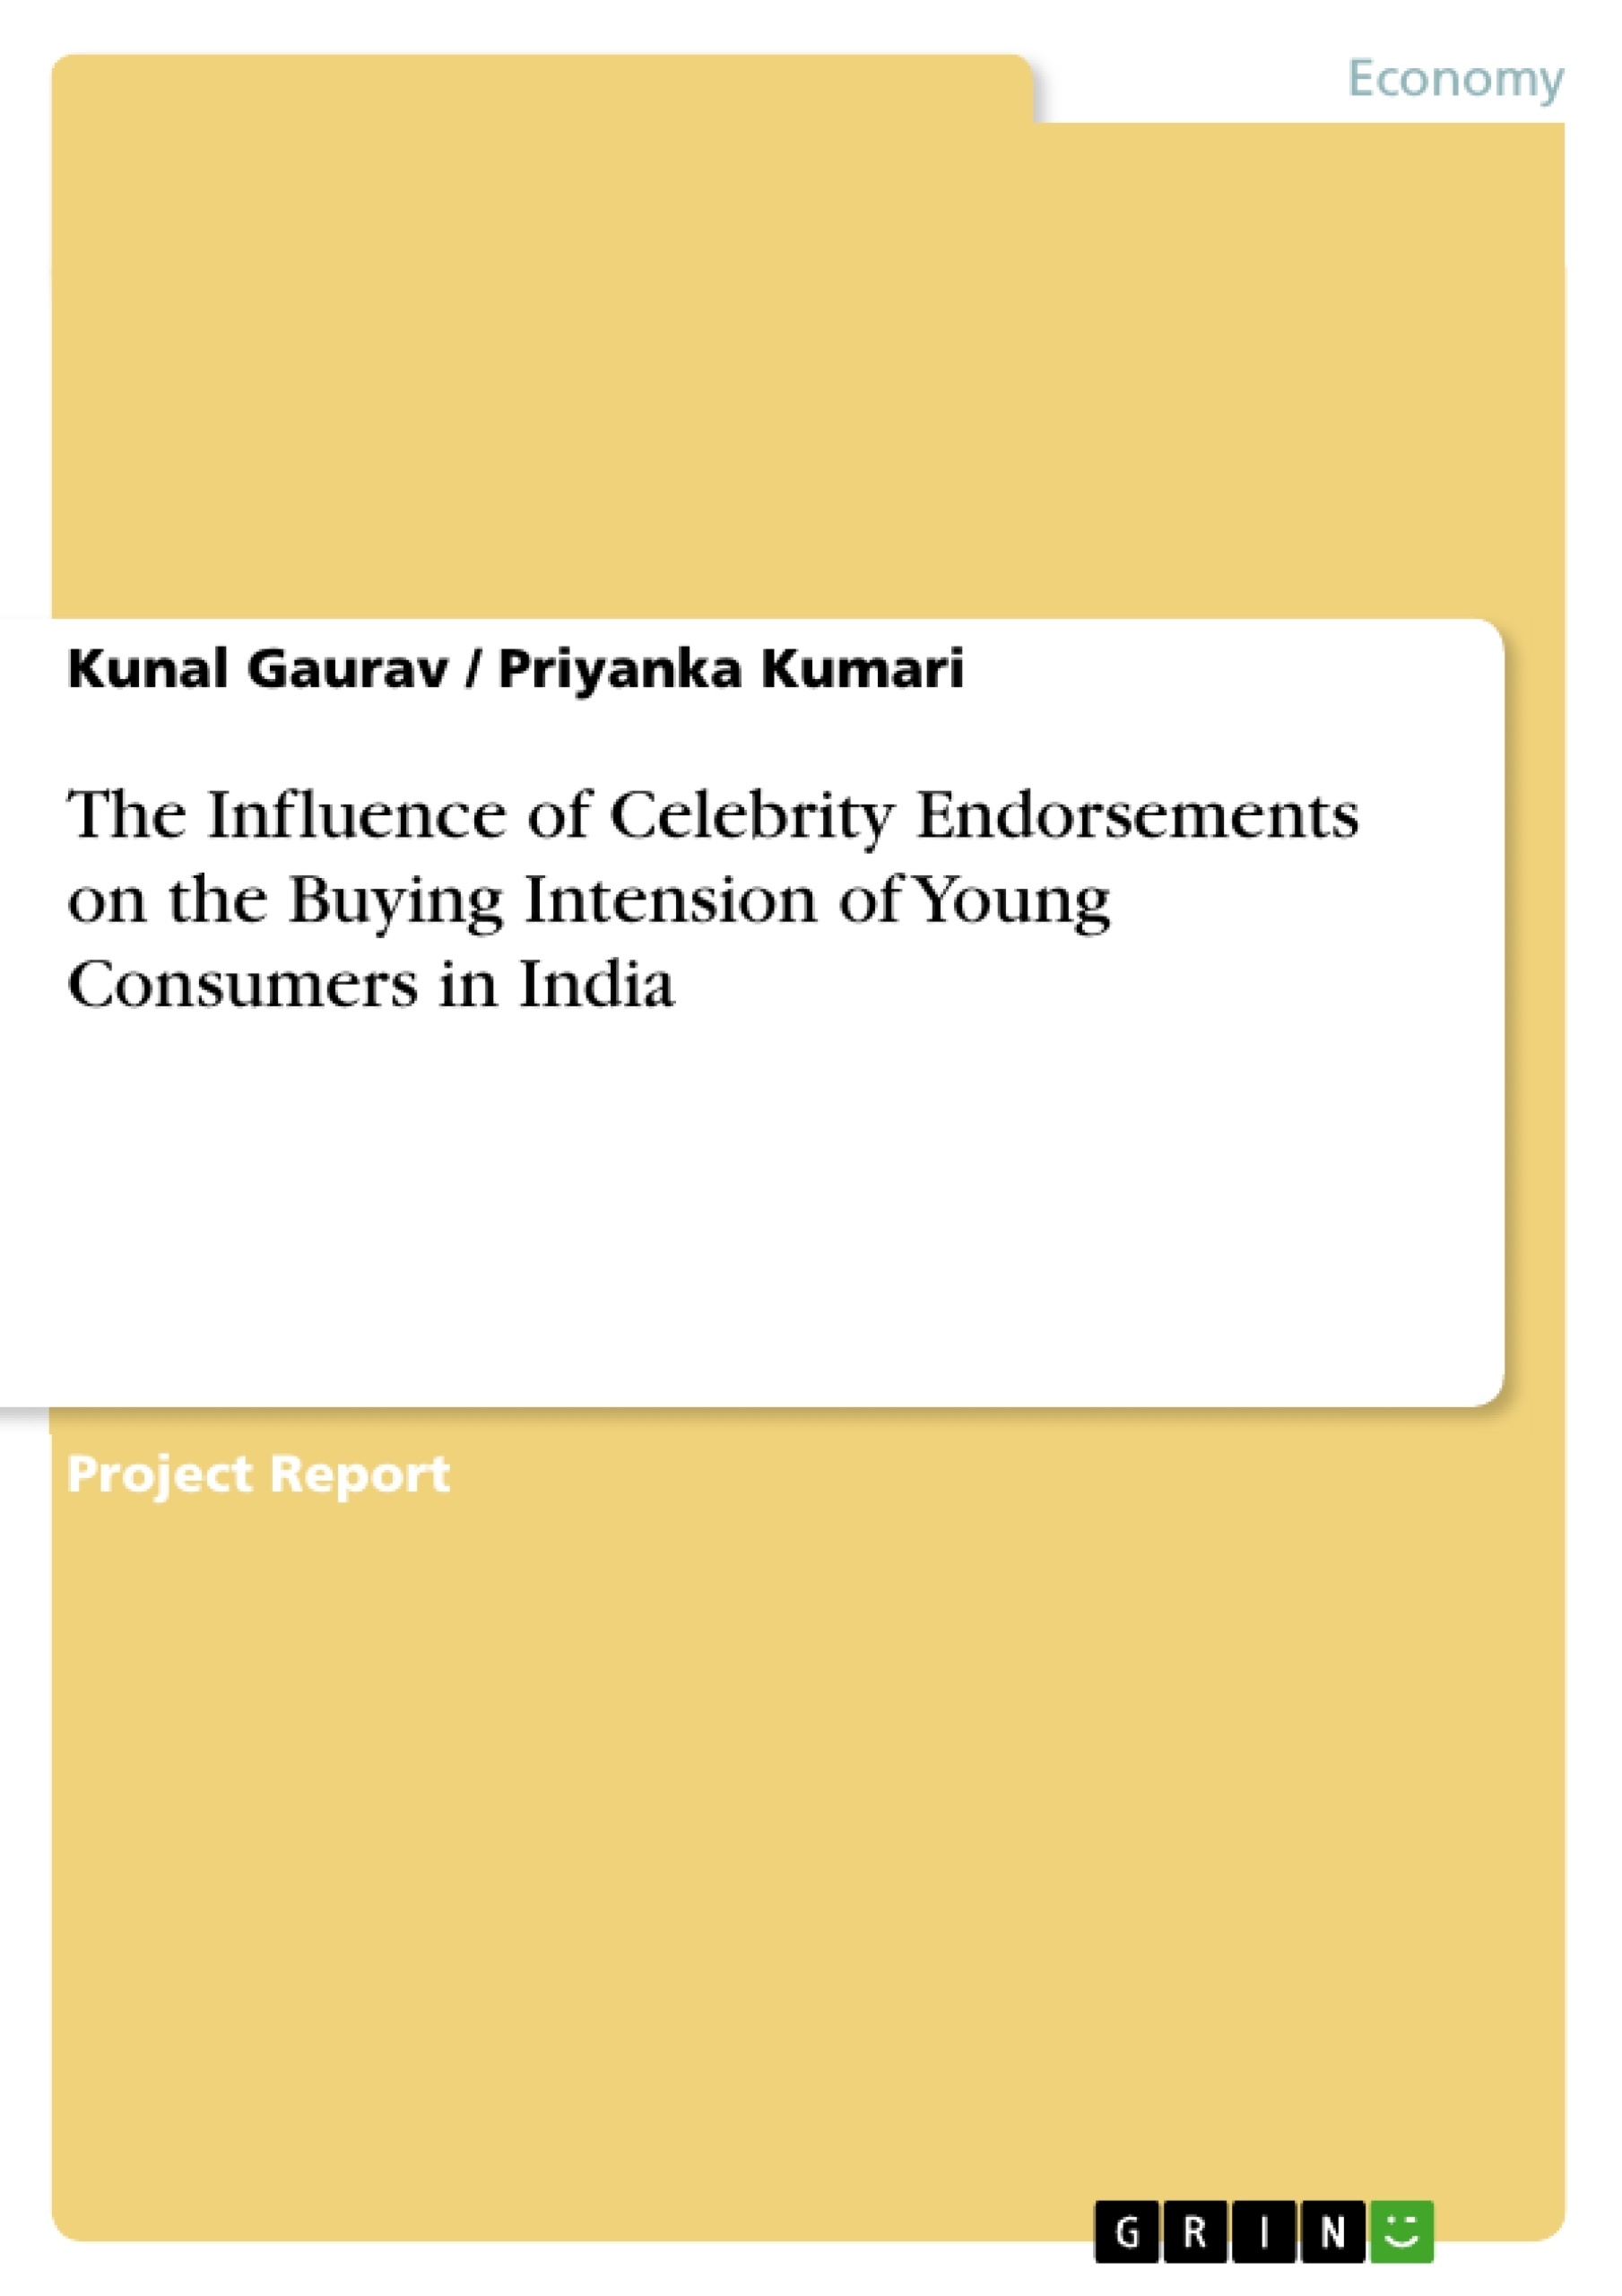 Título: The Influence of Celebrity Endorsements on the Buying Intension of Young Consumers in India